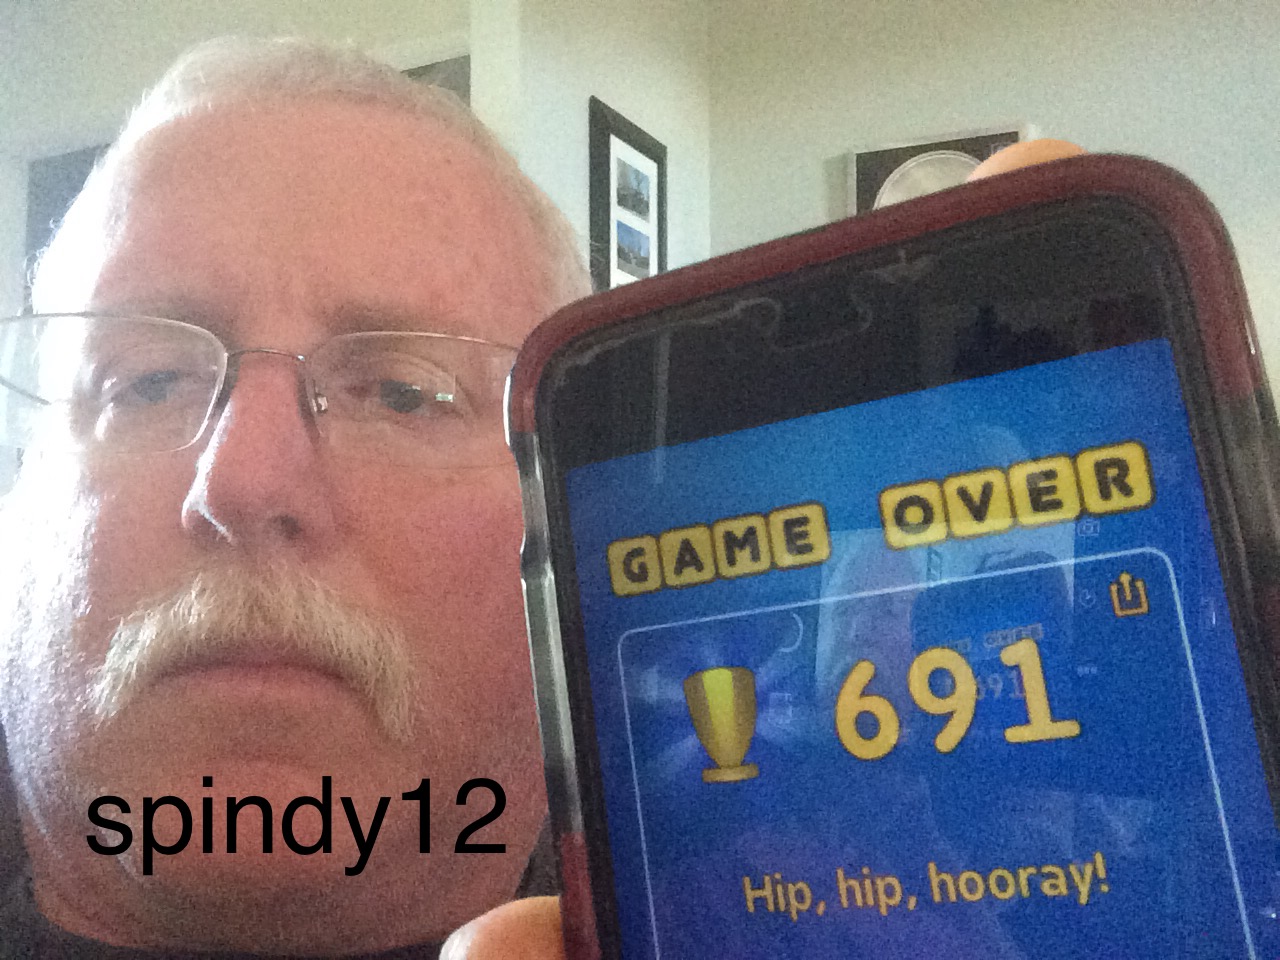 Spindy12: Word Shaker [5x5 board at 1 minute limit] (iOS) 691 points on 2016-05-31 14:03:09